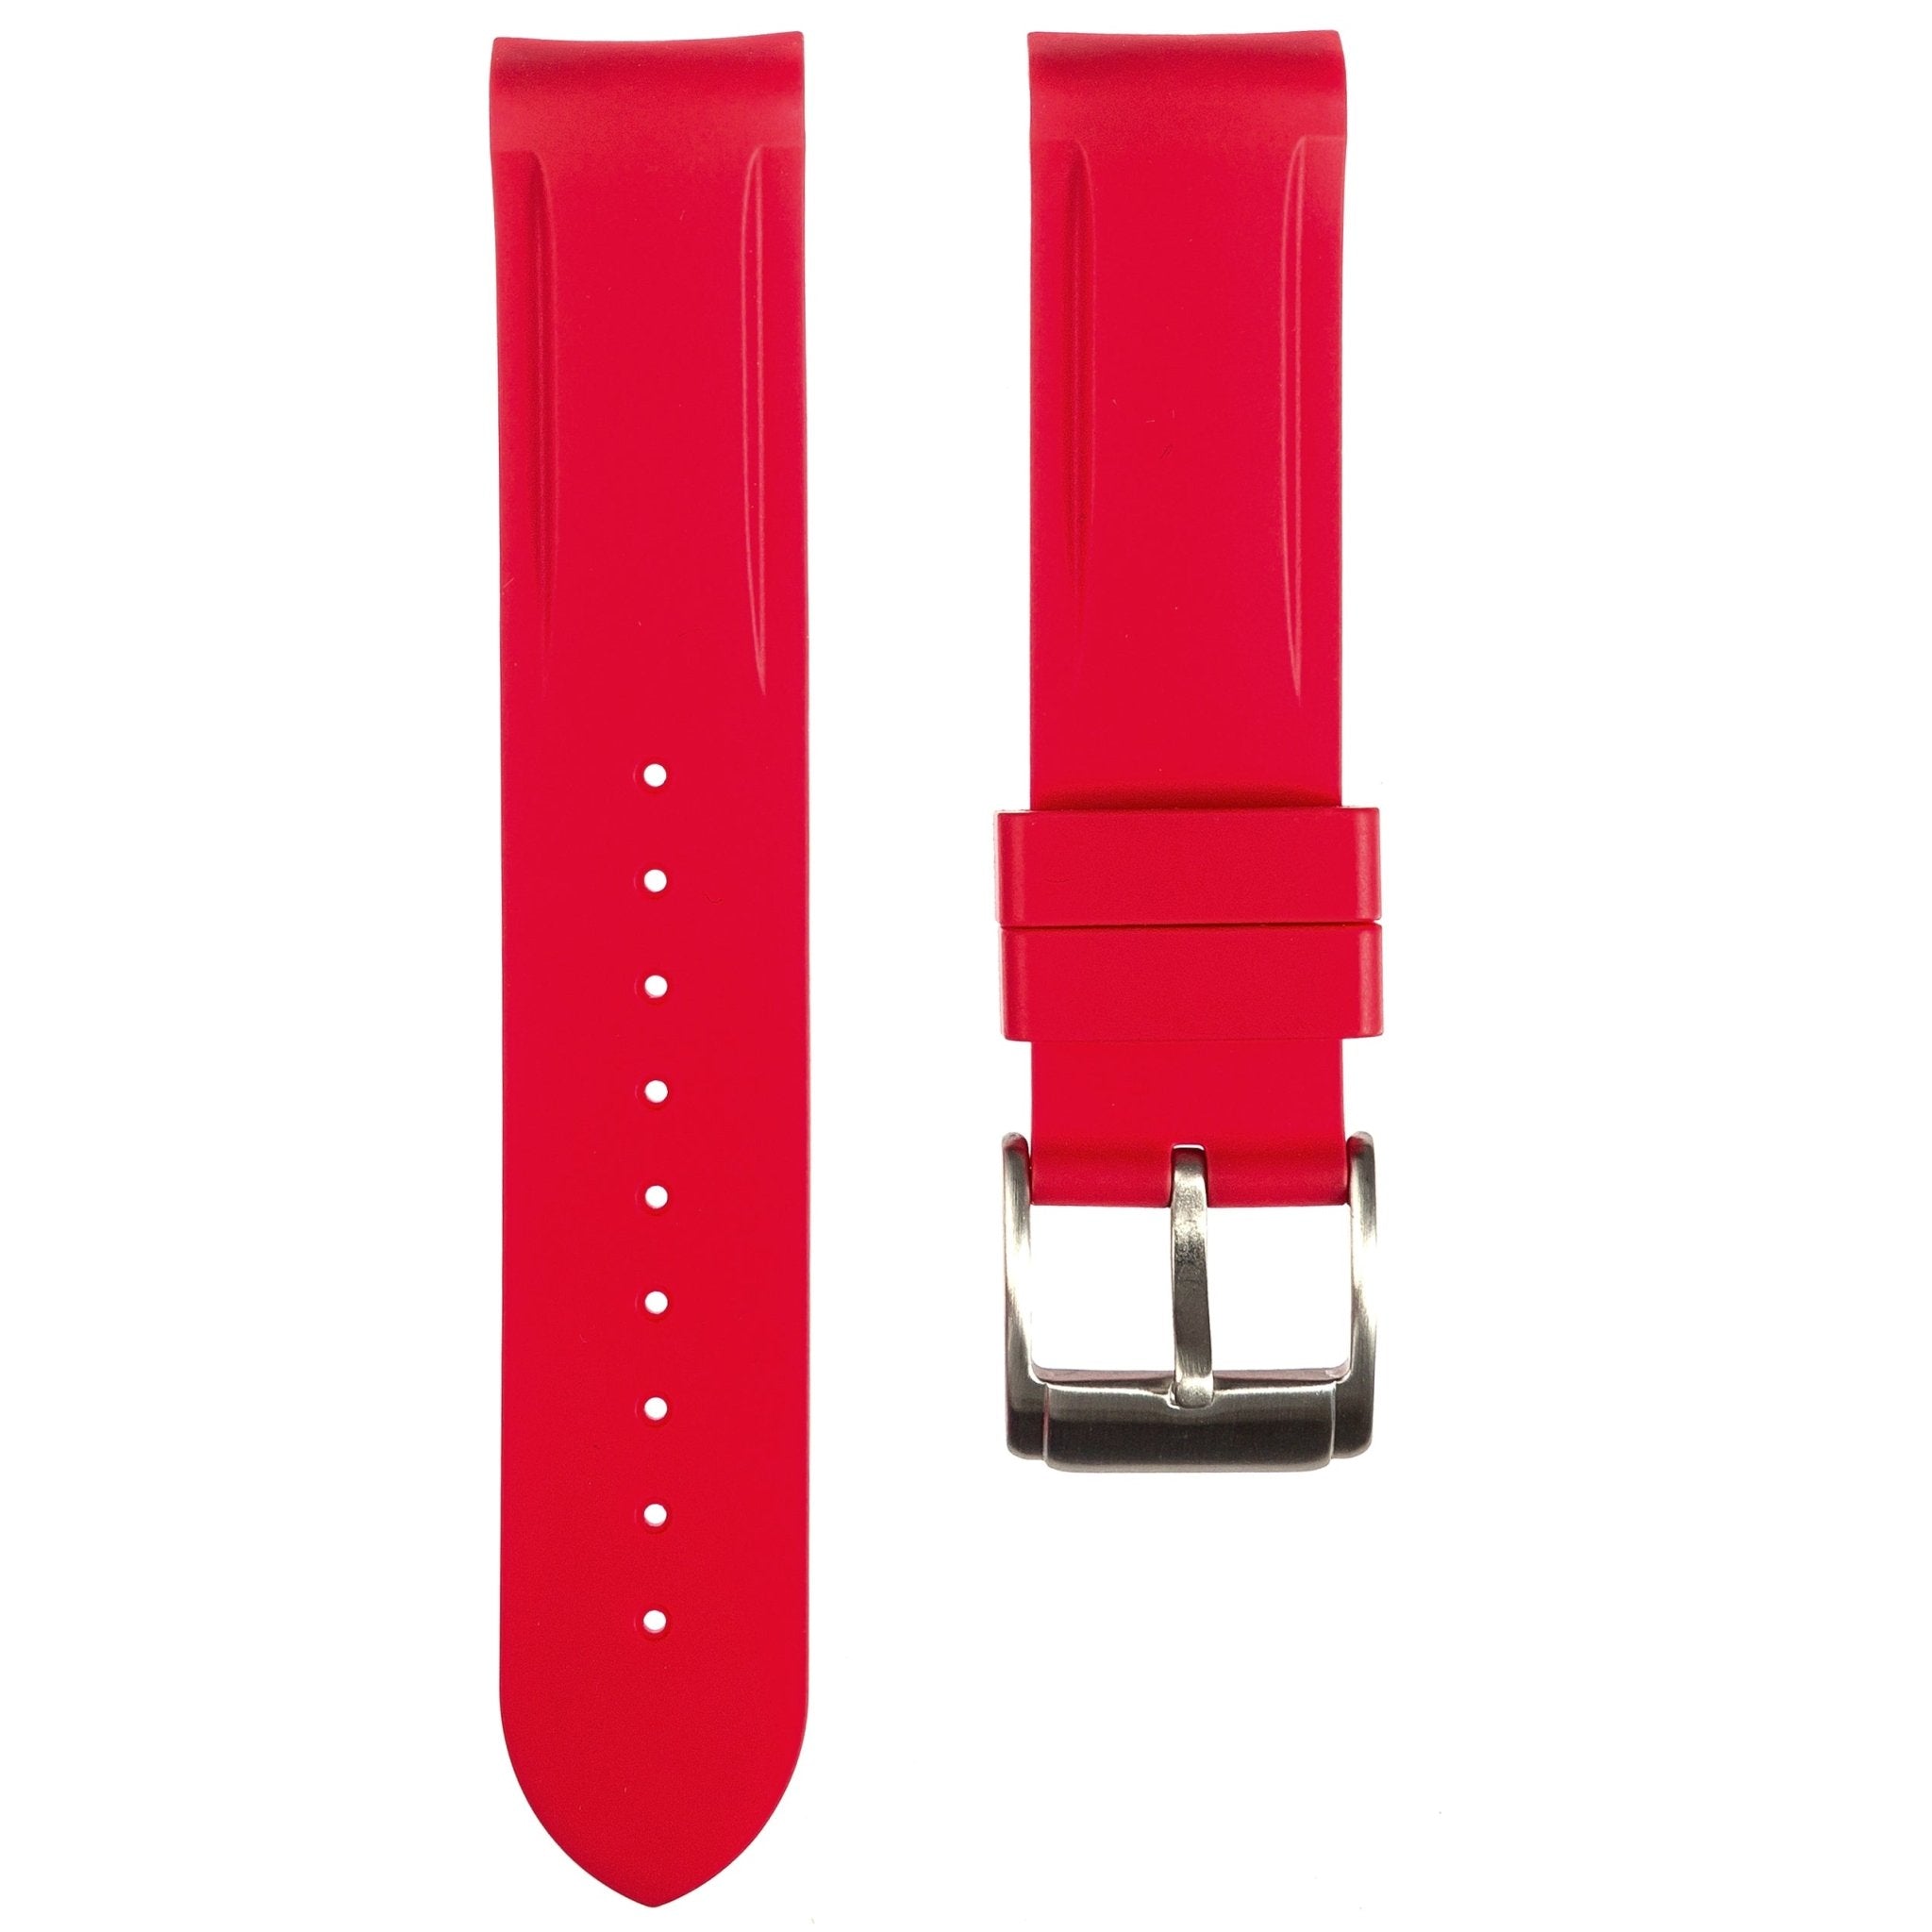 Paramount Curved End Premium Silicone Strap – Red (2404) -StrapSeeker